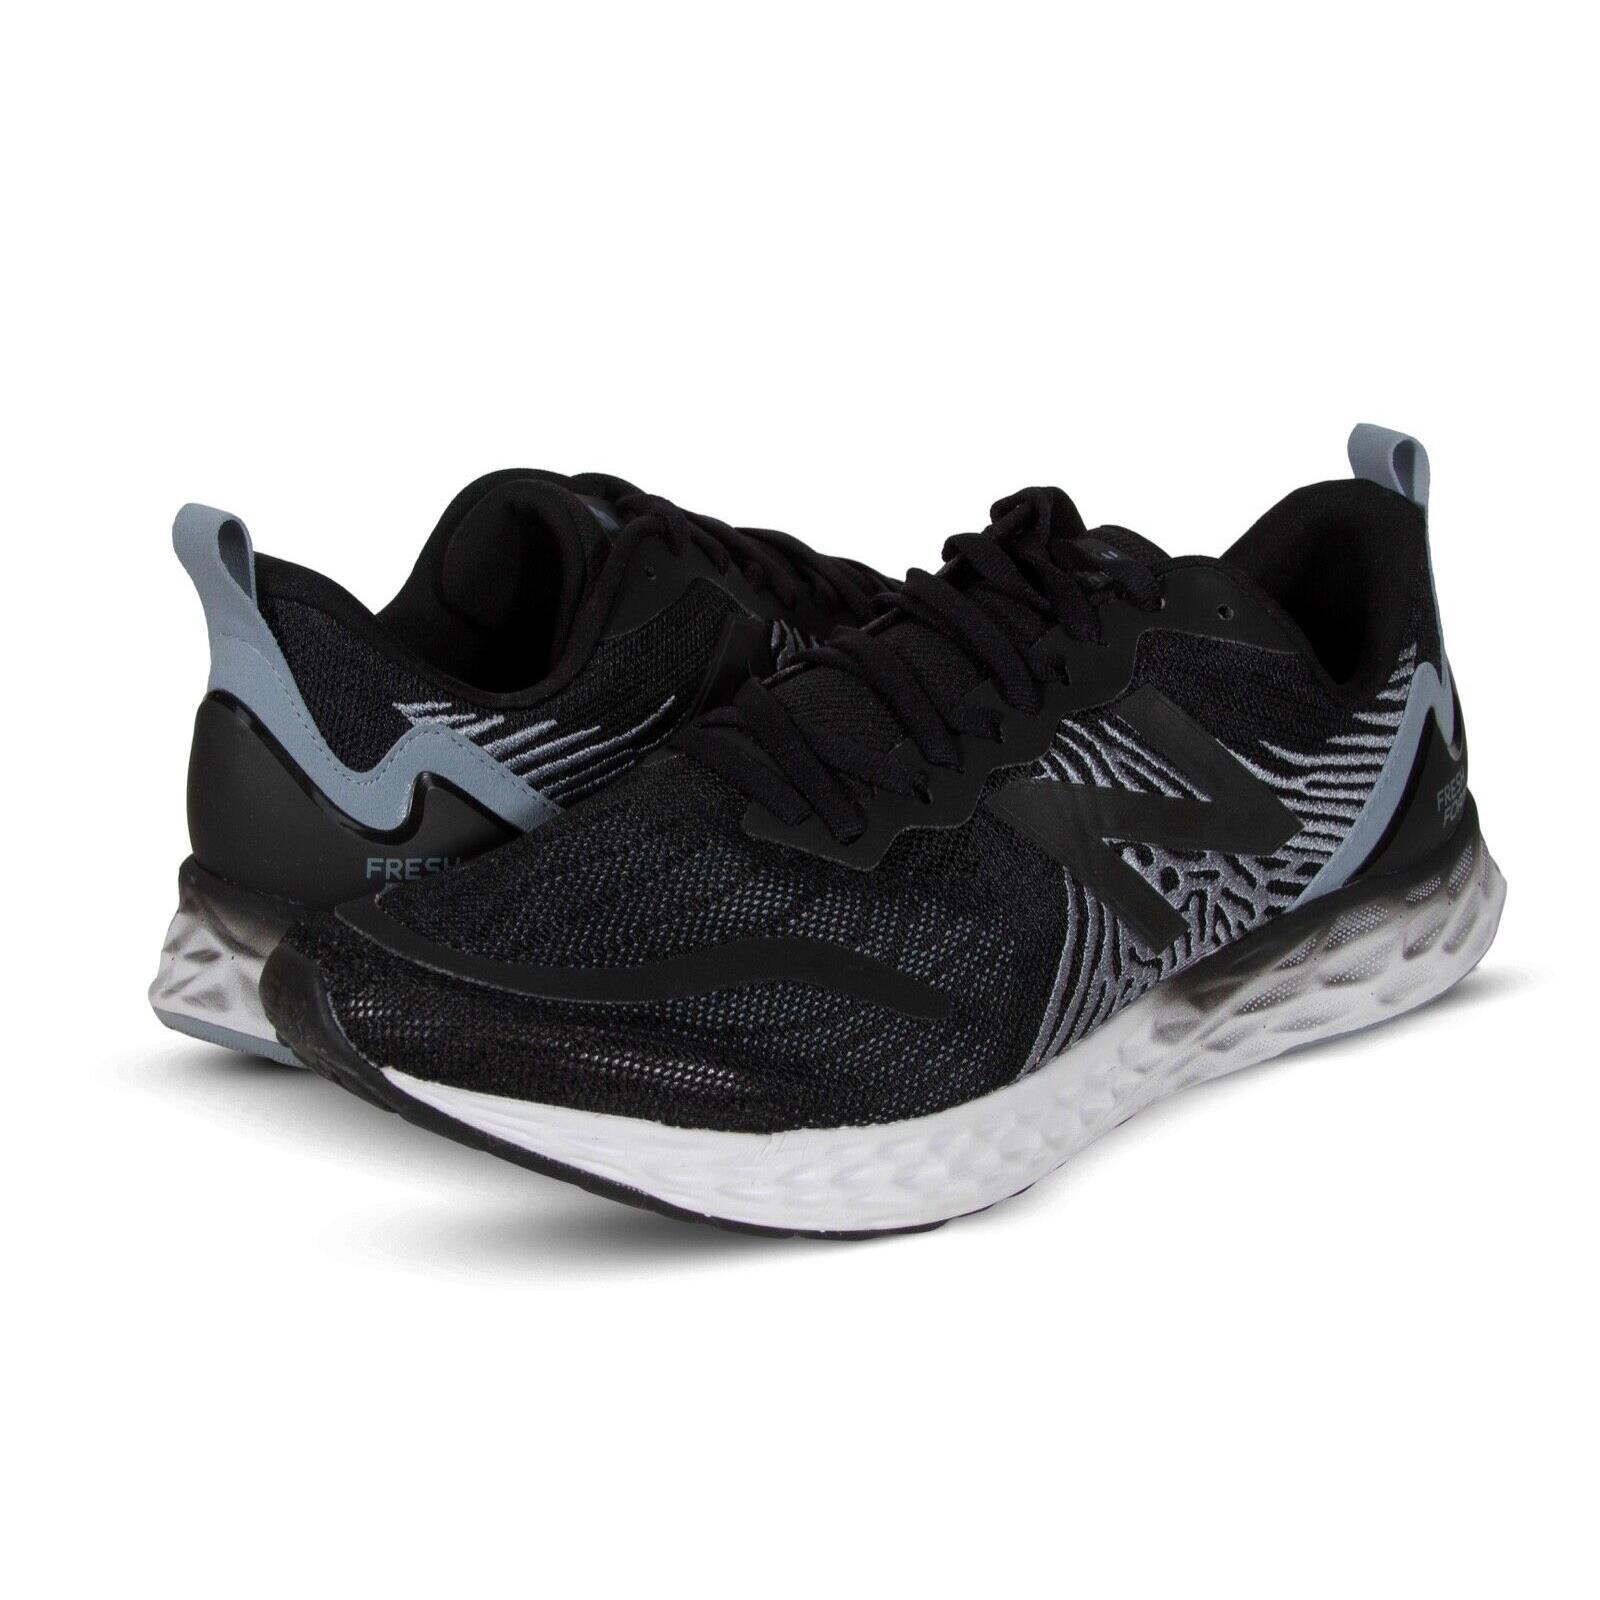 Balance Fresh Foam Tempo Men s Running Shoes in Black with Grey Mtmpobk - Black with Grey